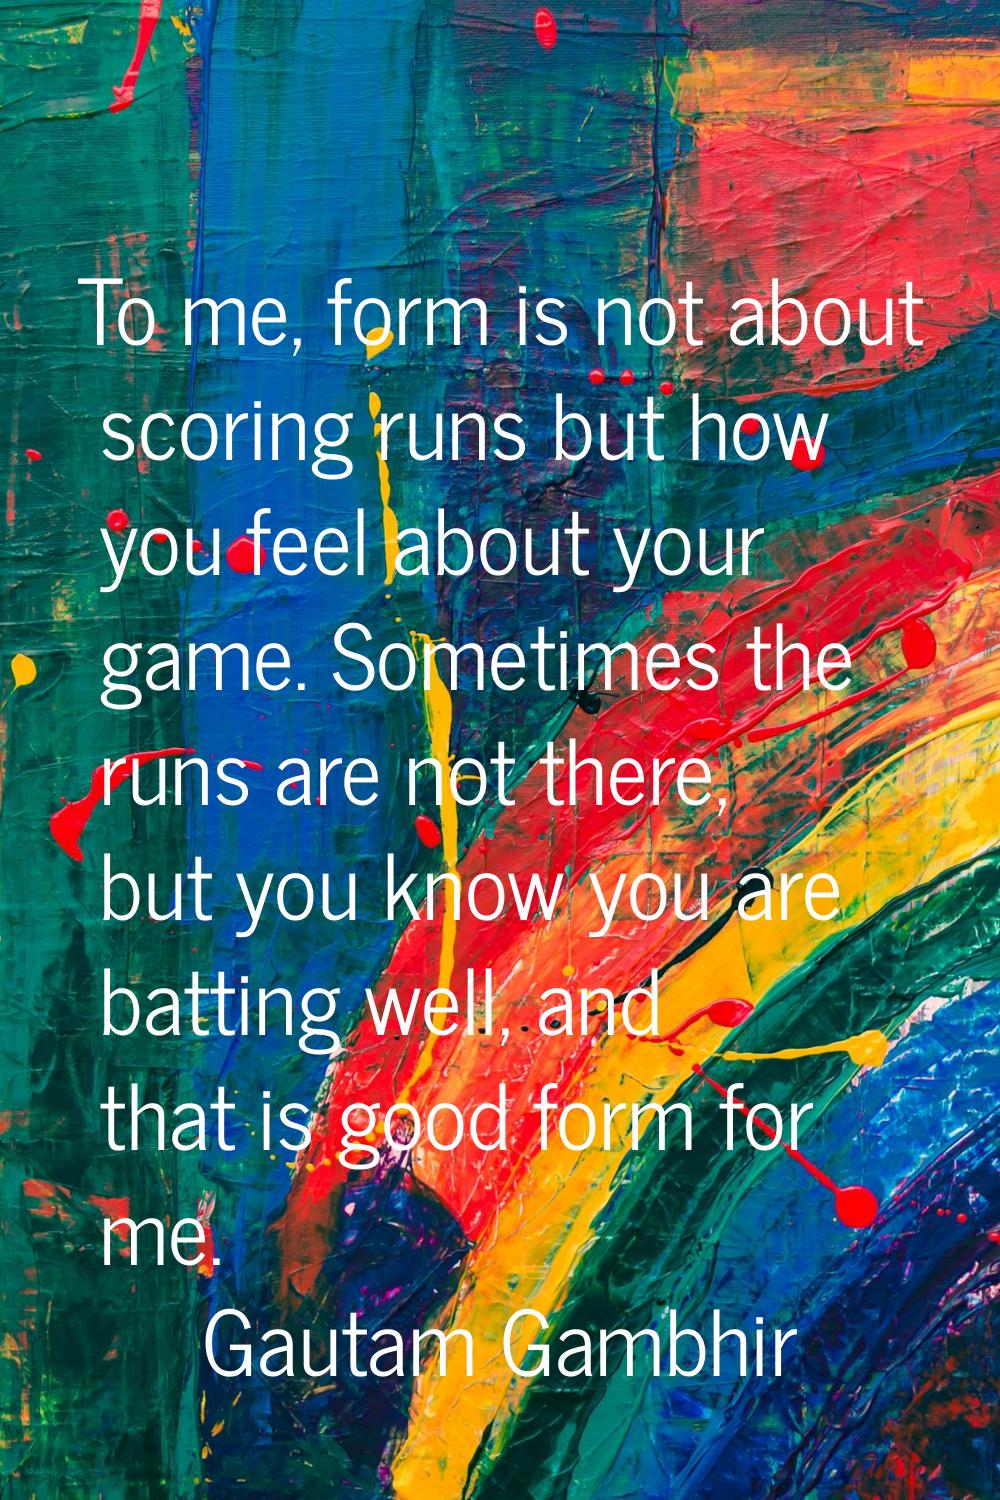 To me, form is not about scoring runs but how you feel about your game. Sometimes the runs are not 